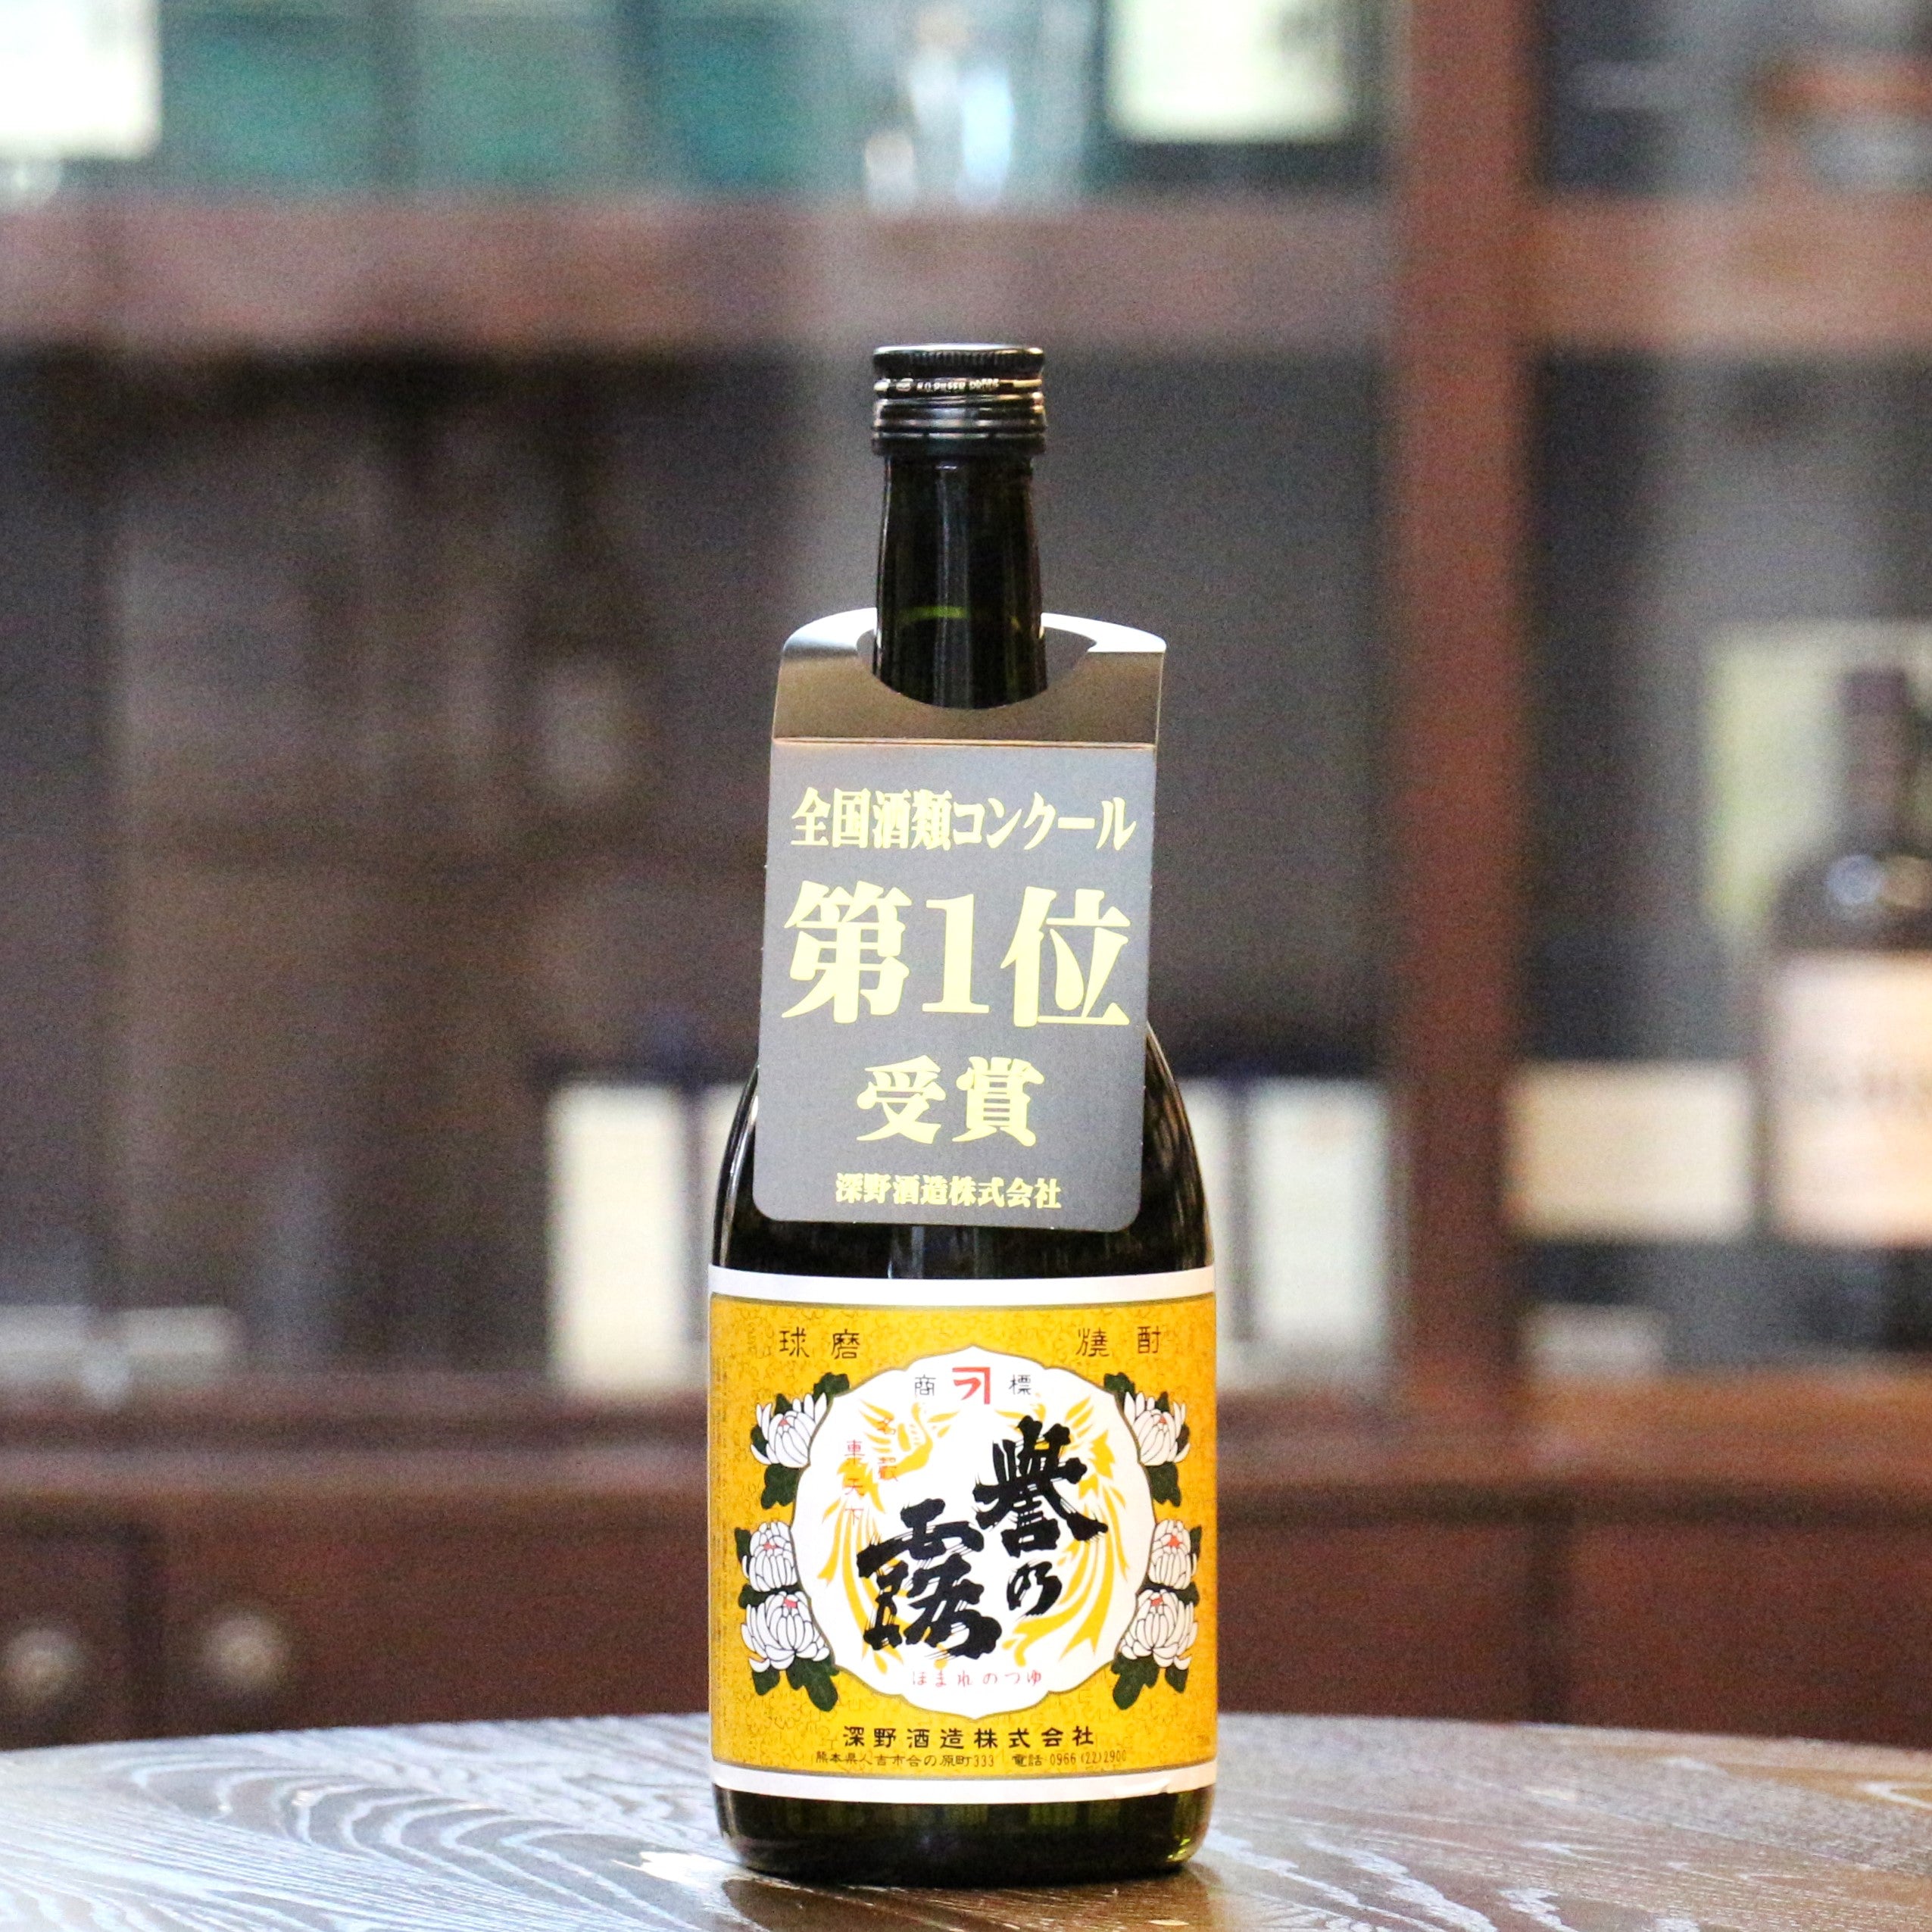 Authentic shochu made through atmospheric distillation, fermented and matured with old clay vats from the late Edo period.